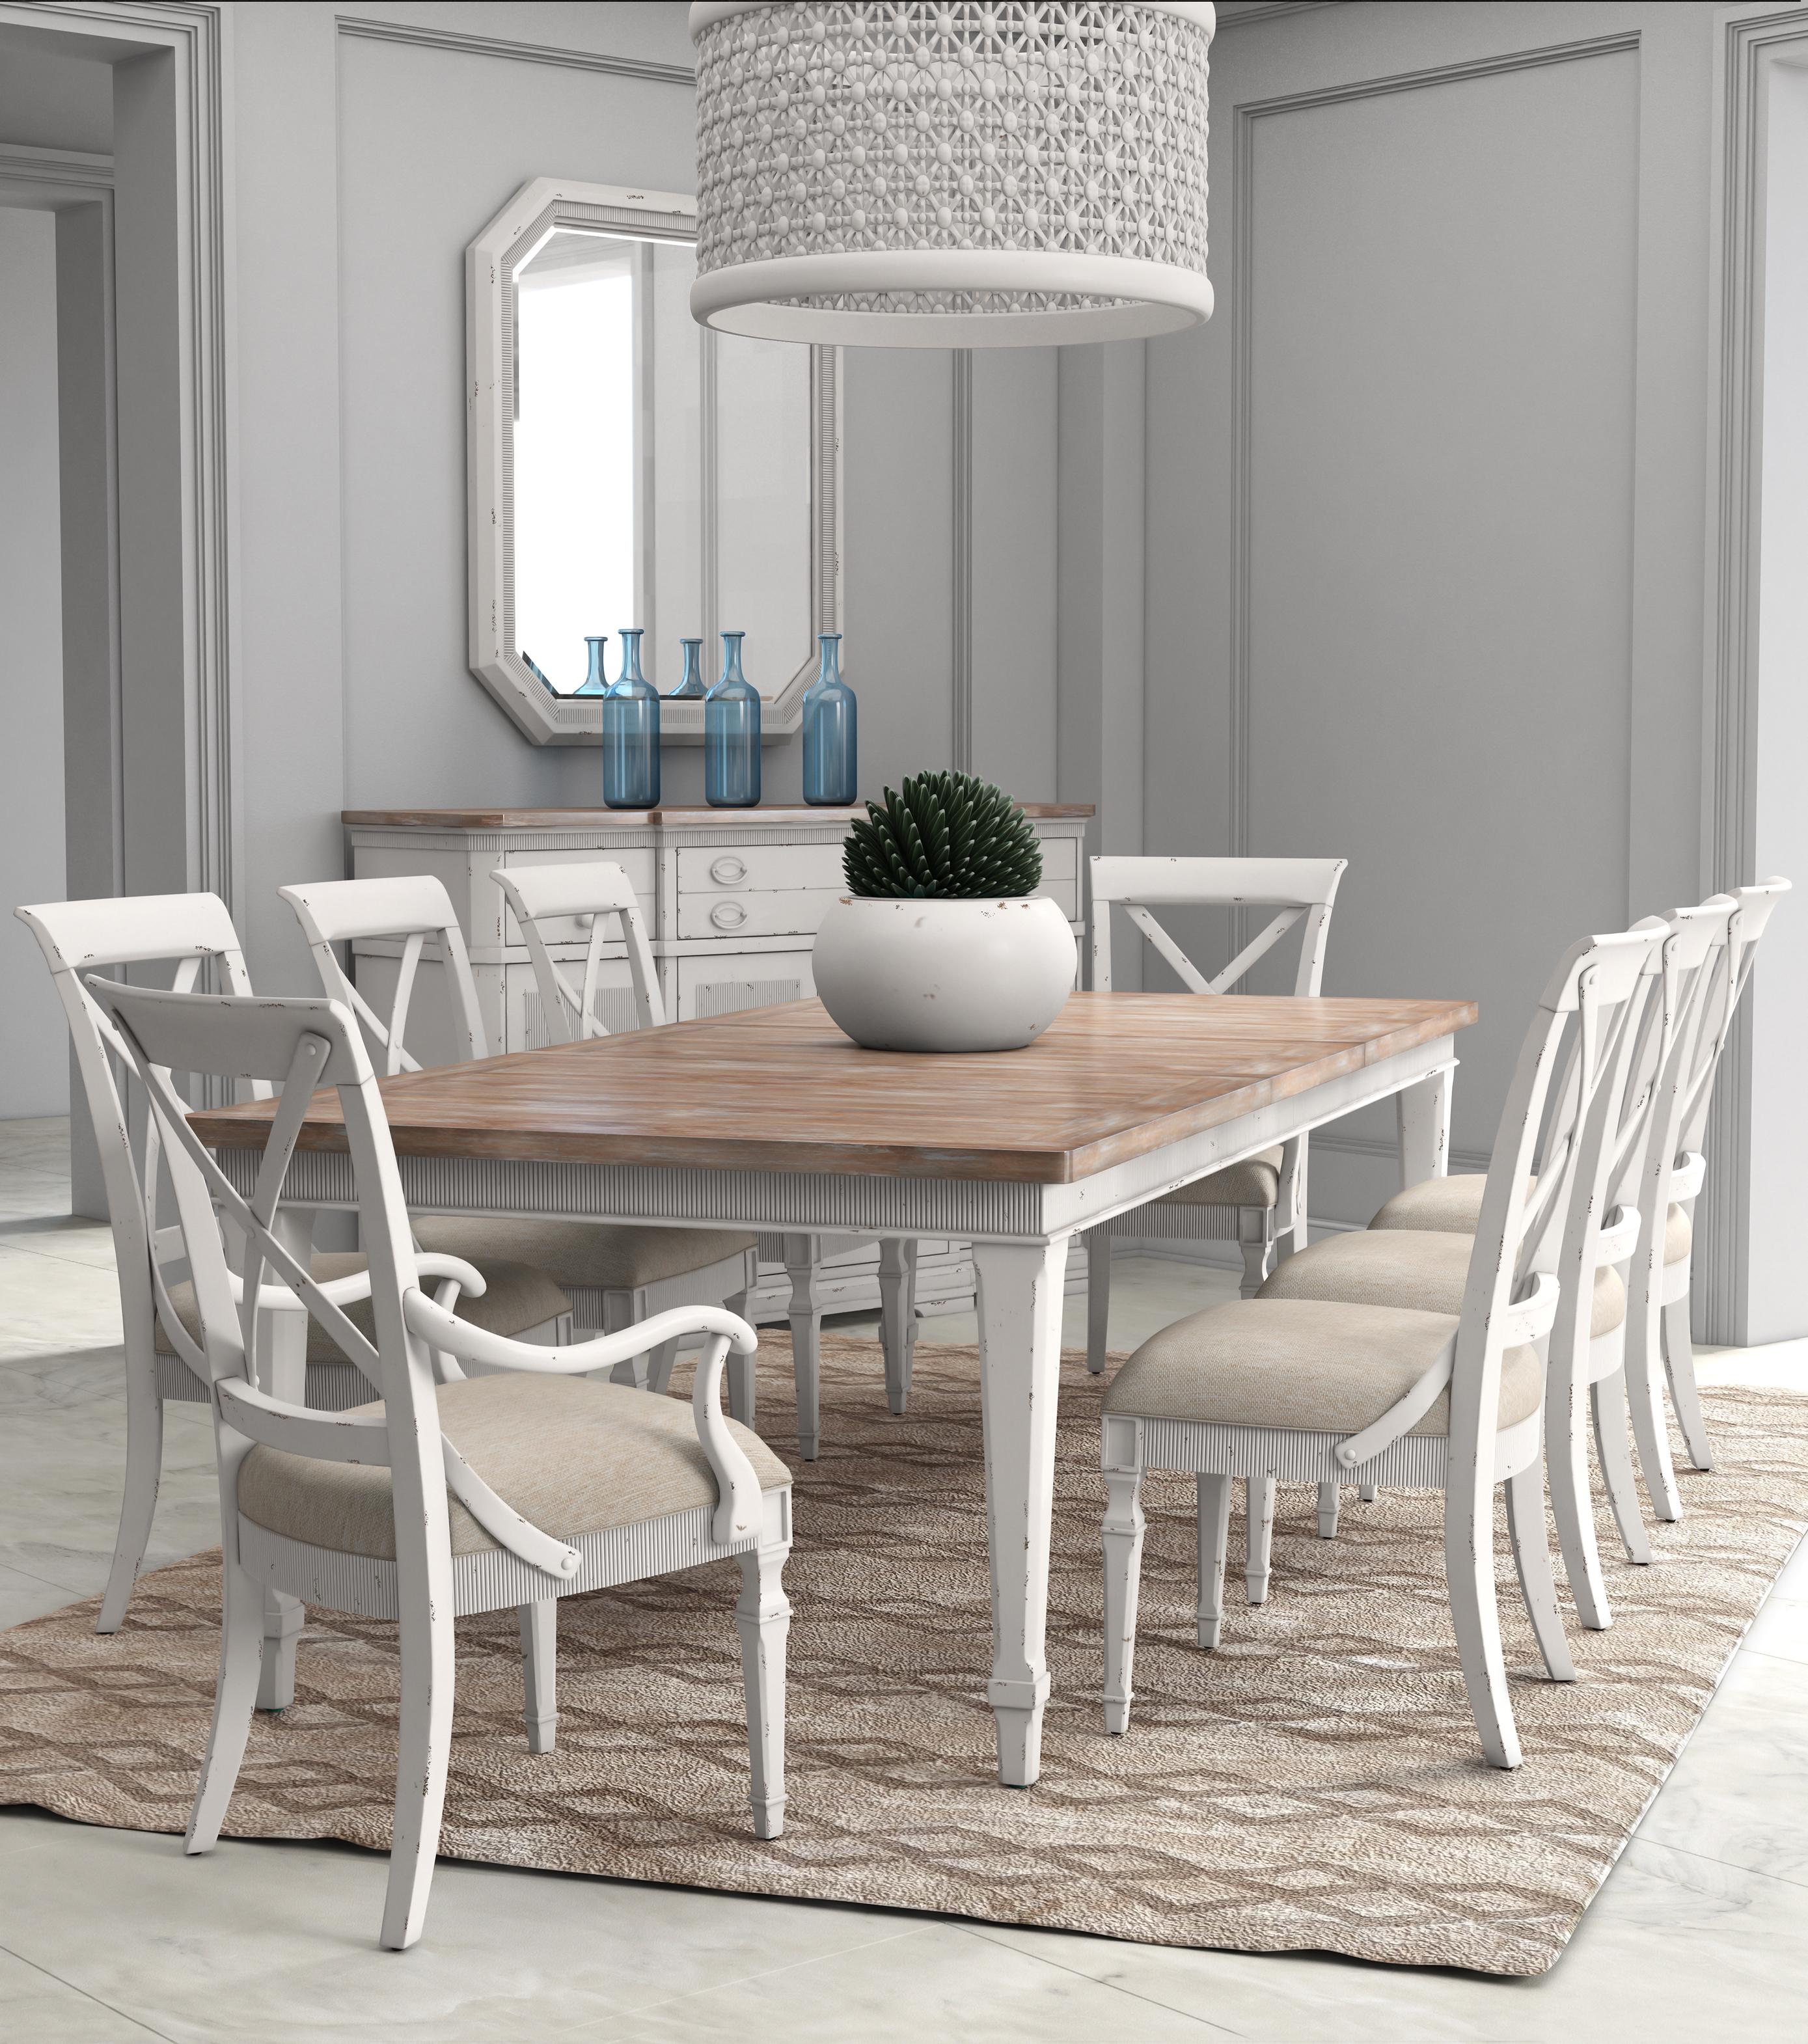 Urban, Farmhouse Dining Table Set Palisade 273220-2908-11pcs in Light Brown, Beige Fabric